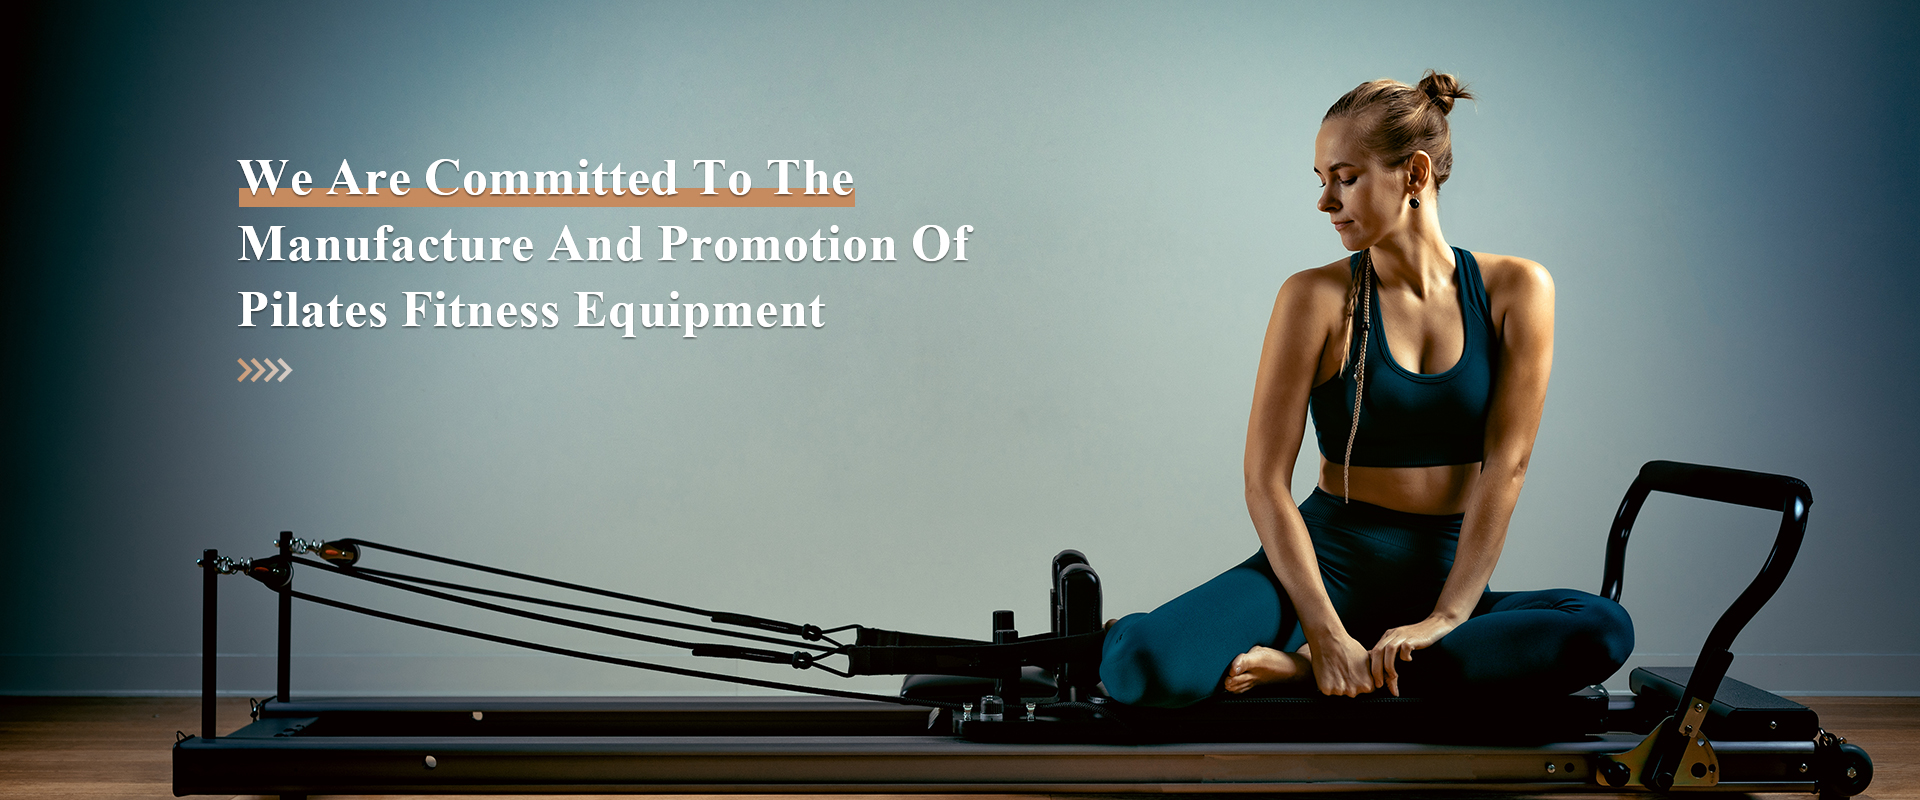 Manufacture And Promotion Of Pilates Fitness Equipment